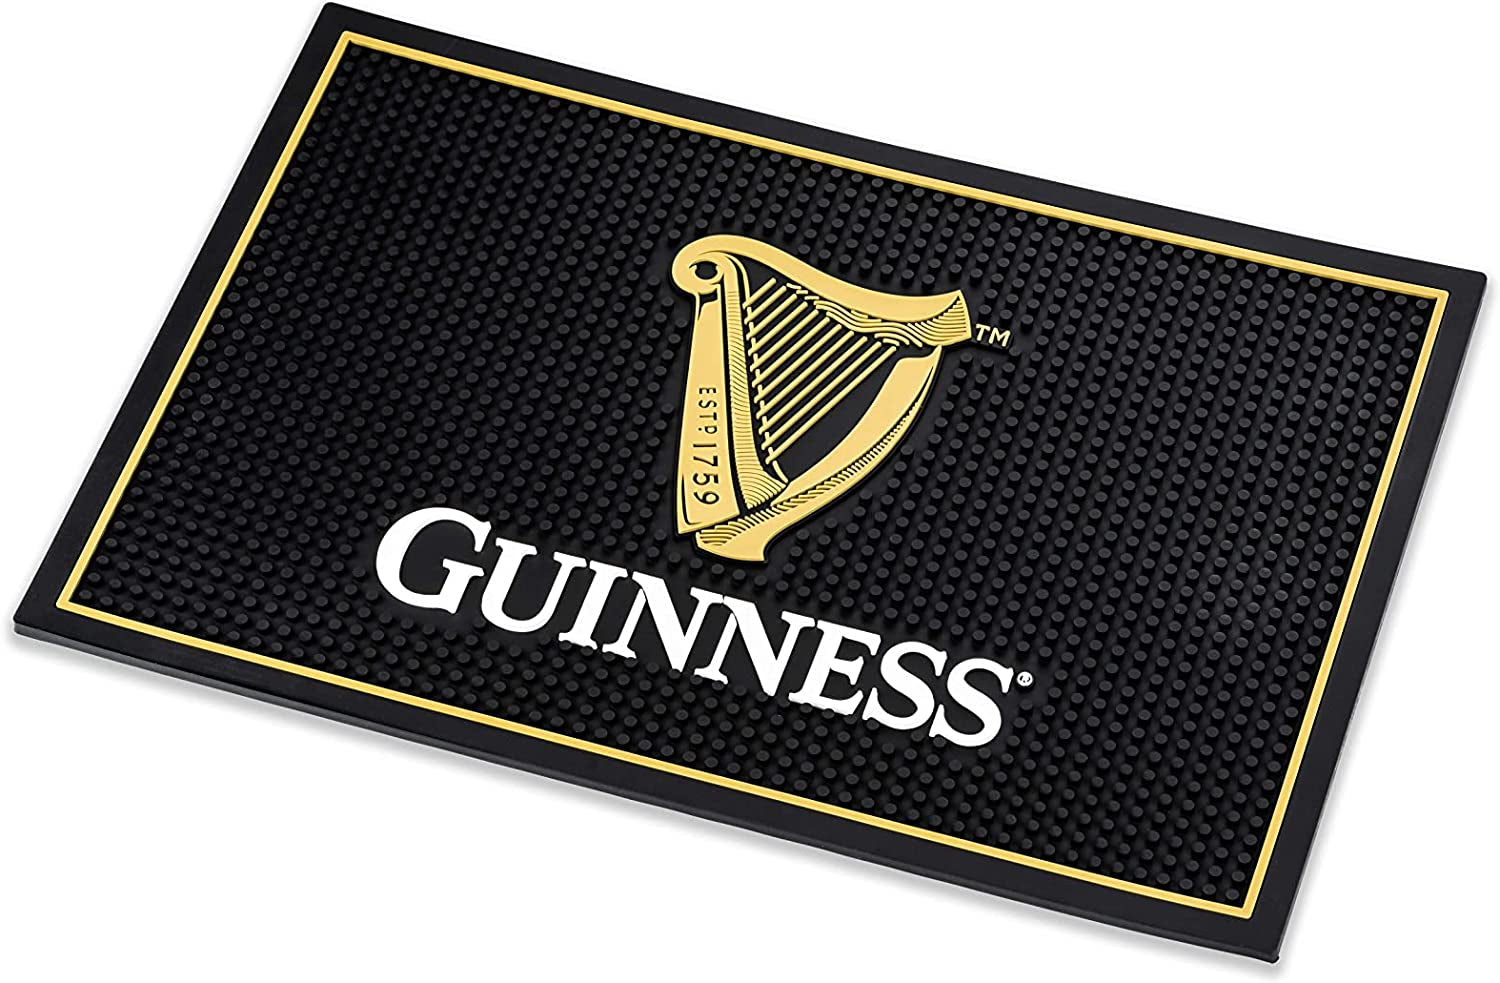 Guinness Bar and Spill Mat for Countertops | Irish Rubber Bar Mat for Drips with Guinness Harp Logo | Professional Bar Service Mat with Guinness Beer, 18 X 12” Compatible